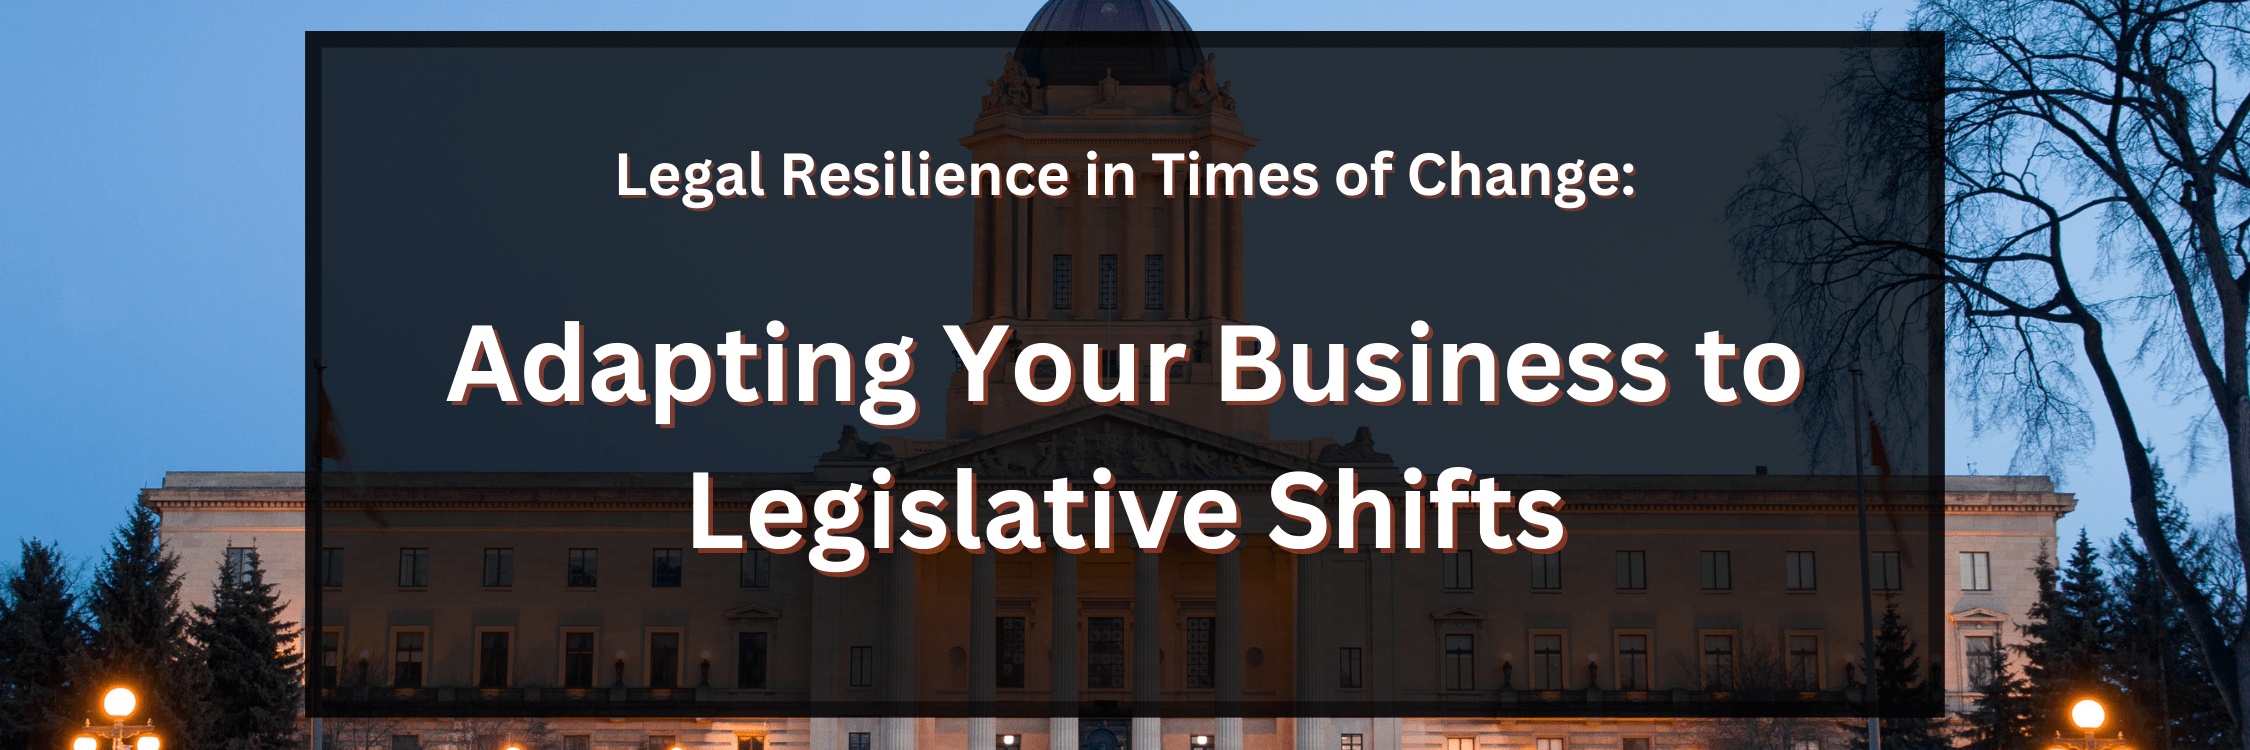 Legal Resilience In Times Of Change Adapting Your Business To Legislative Shifts